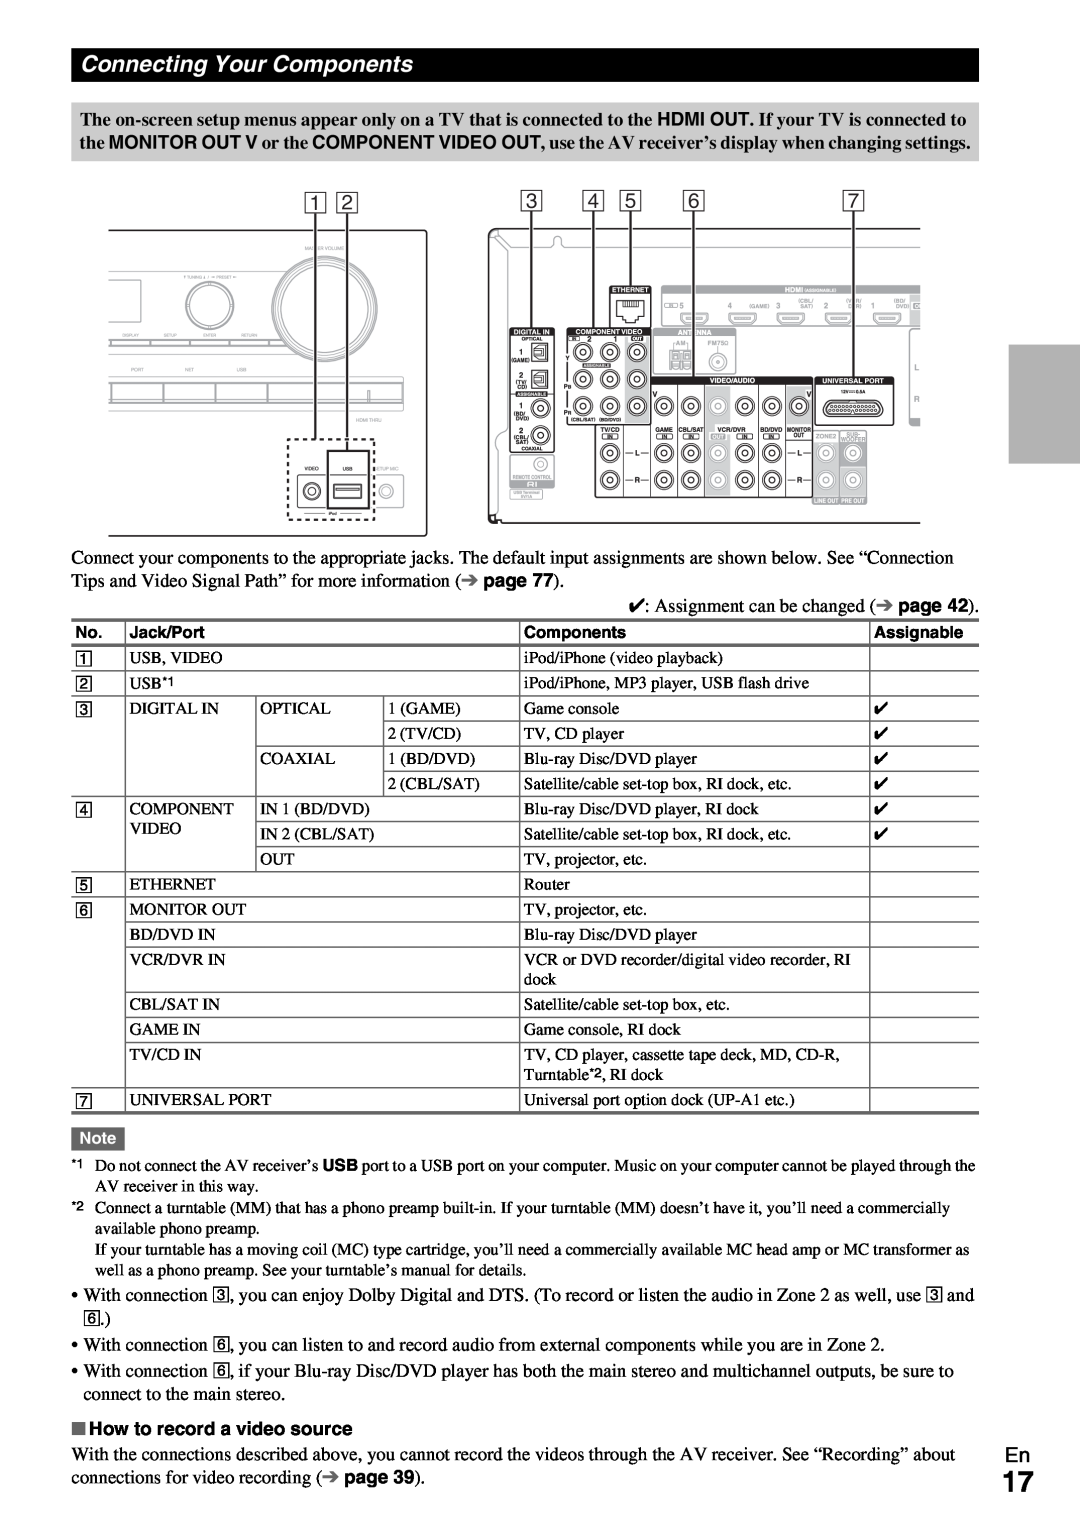 Onkyo HT-RC360 instruction manual Connecting Your Components, A B C D E F G, How to record a video source 